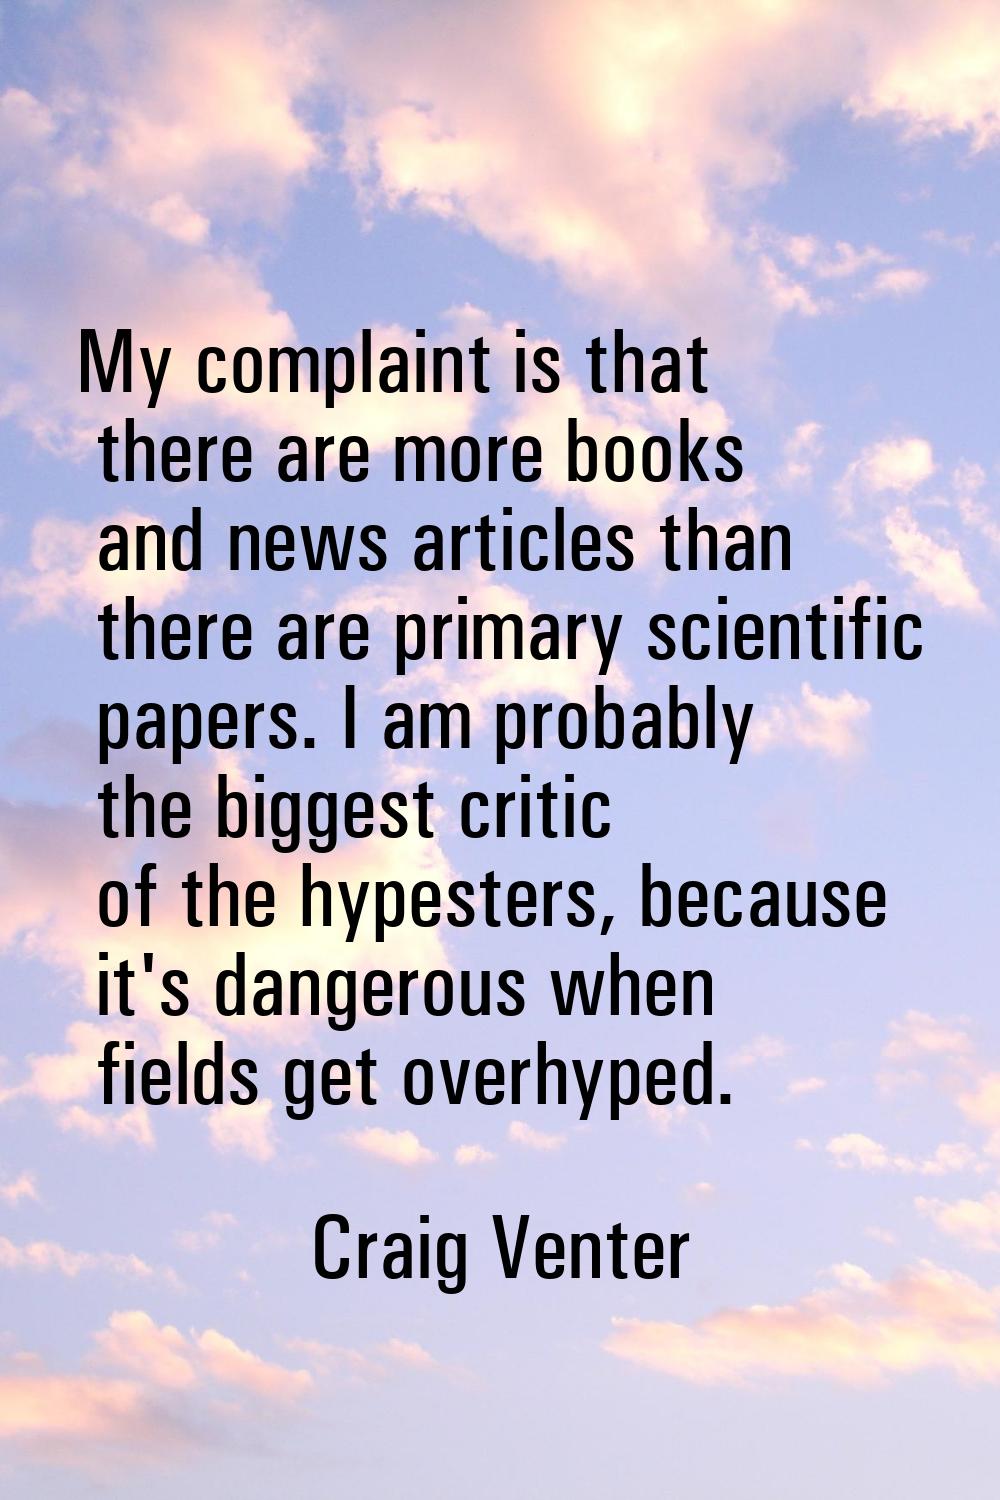 My complaint is that there are more books and news articles than there are primary scientific paper